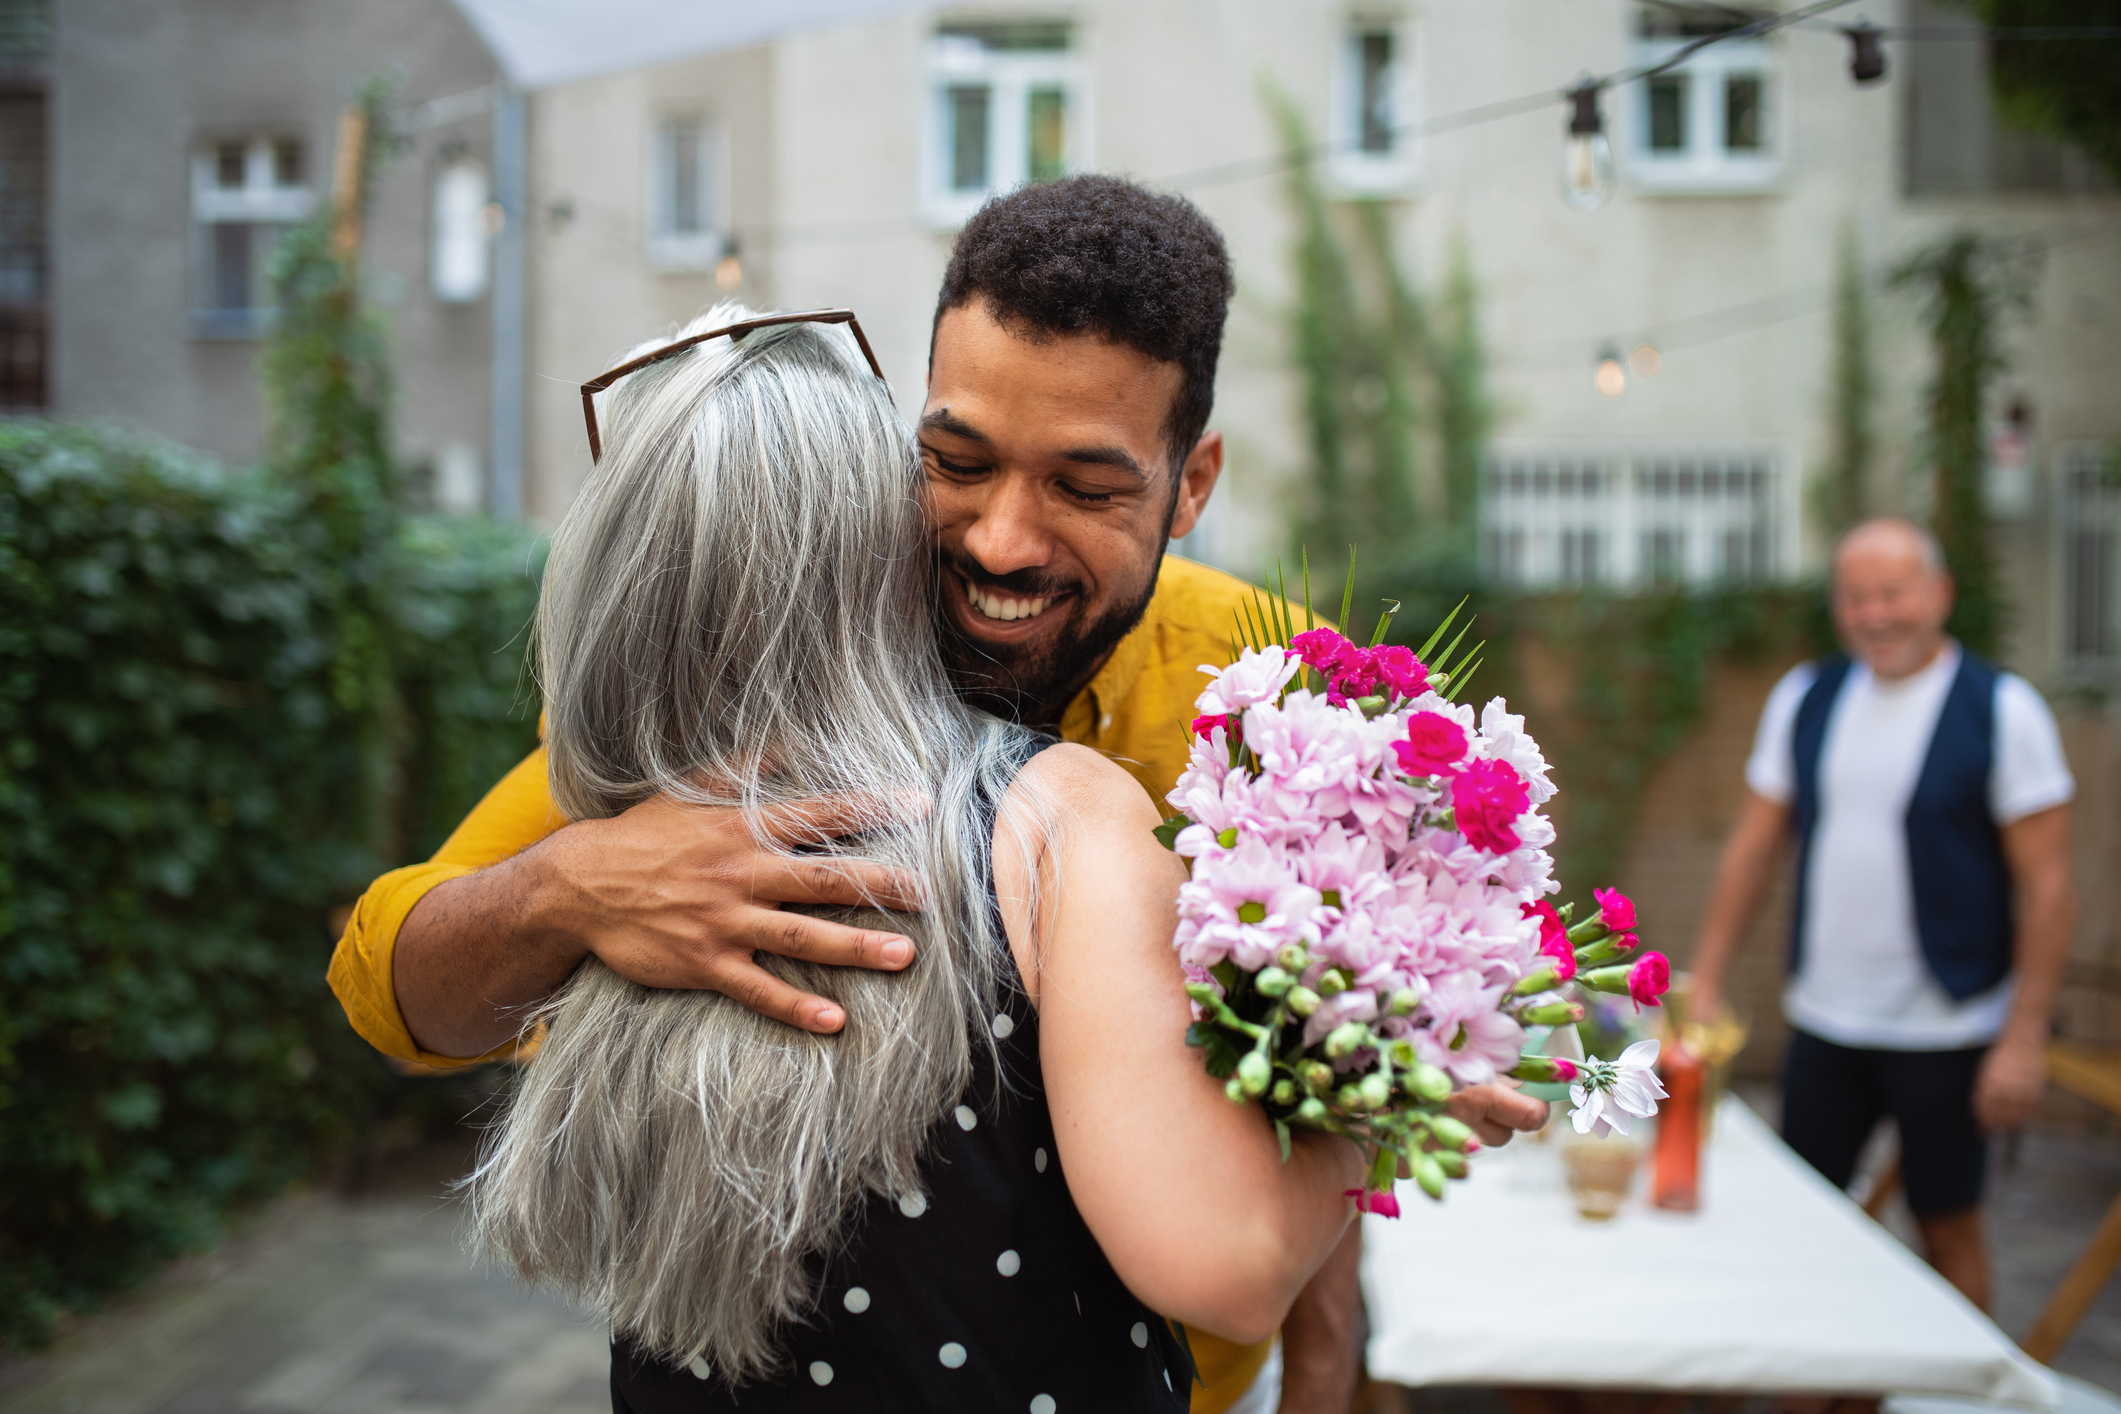 younger man hugging a woman and giving her flowers